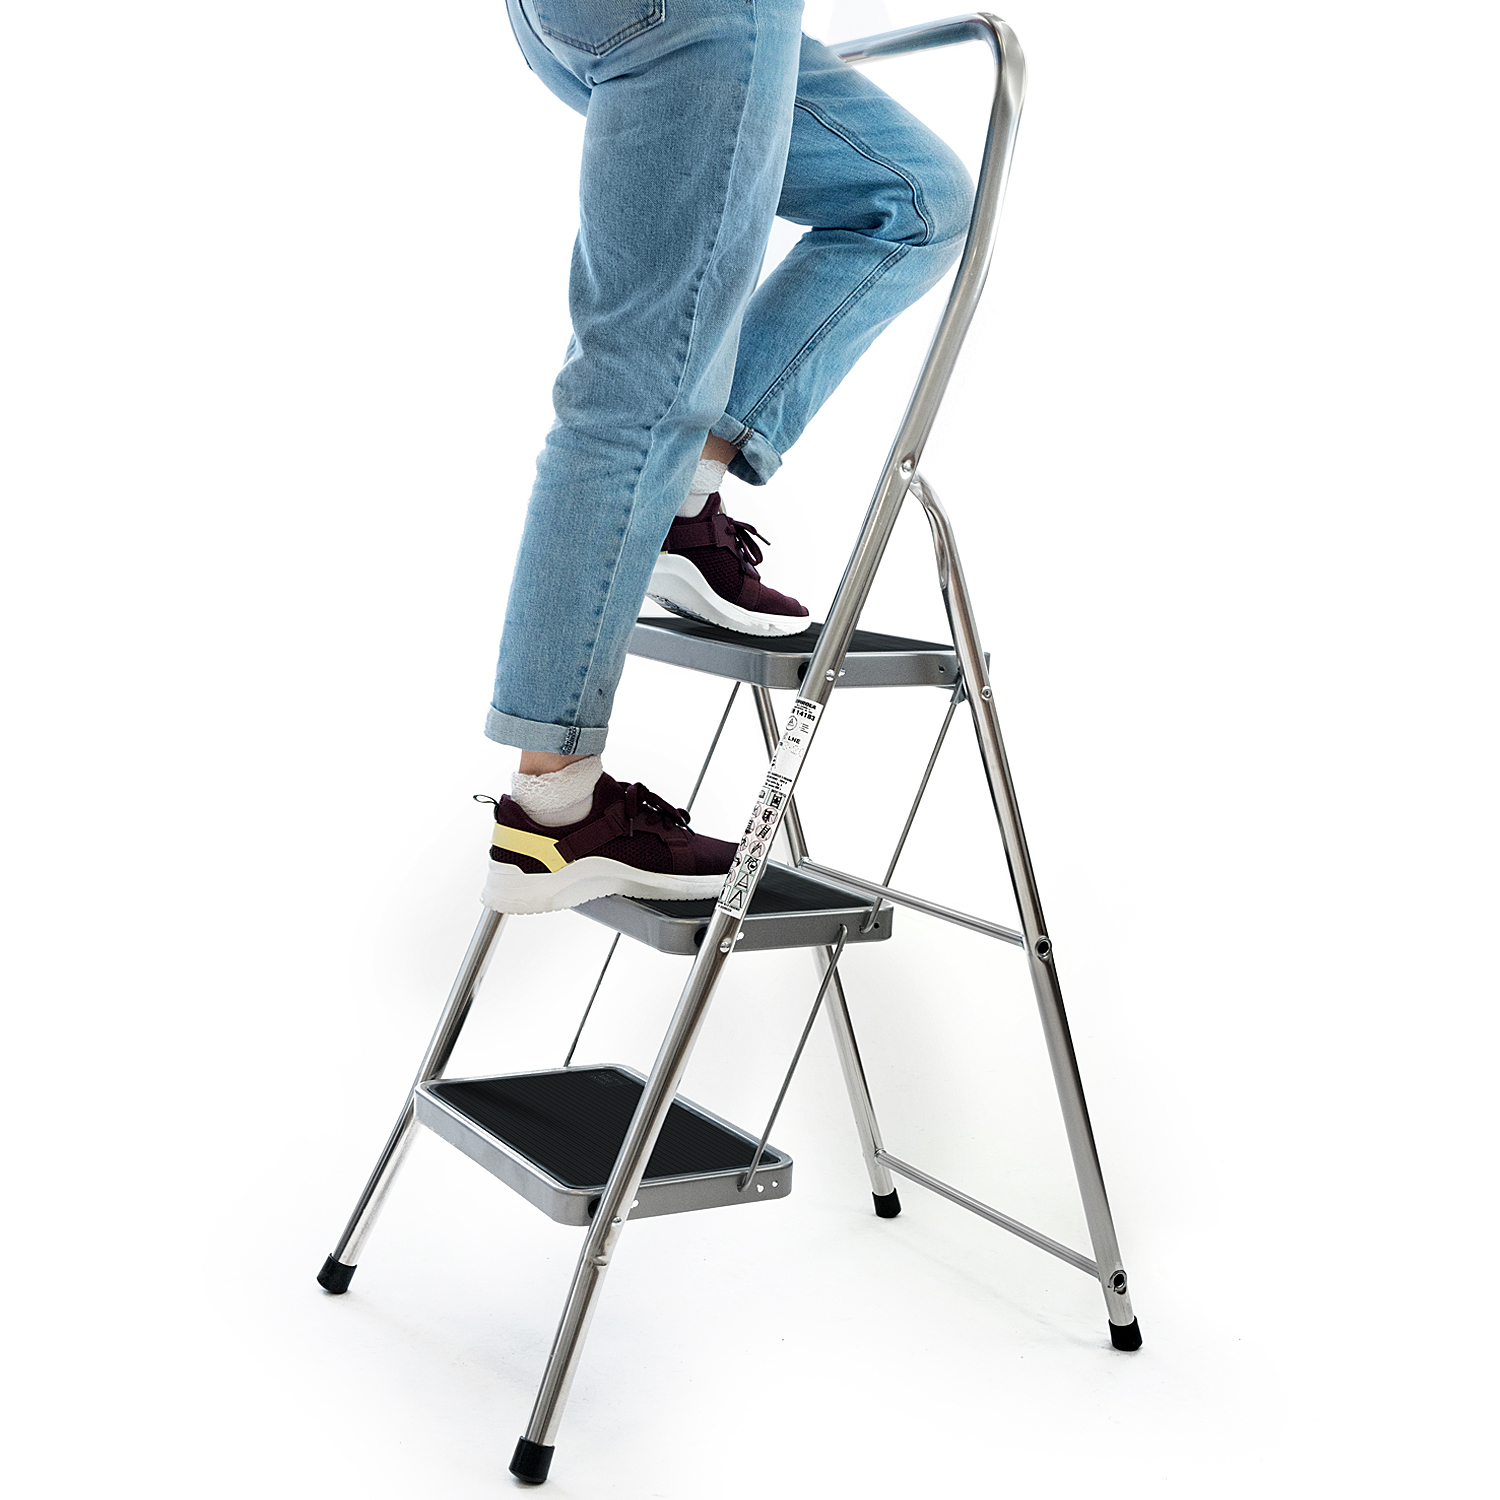 High Handle for knee support 150 kg Tatkraft Hike 3 Step Ladder Made in Italy Non Slip wide steps T/ÜV certificate